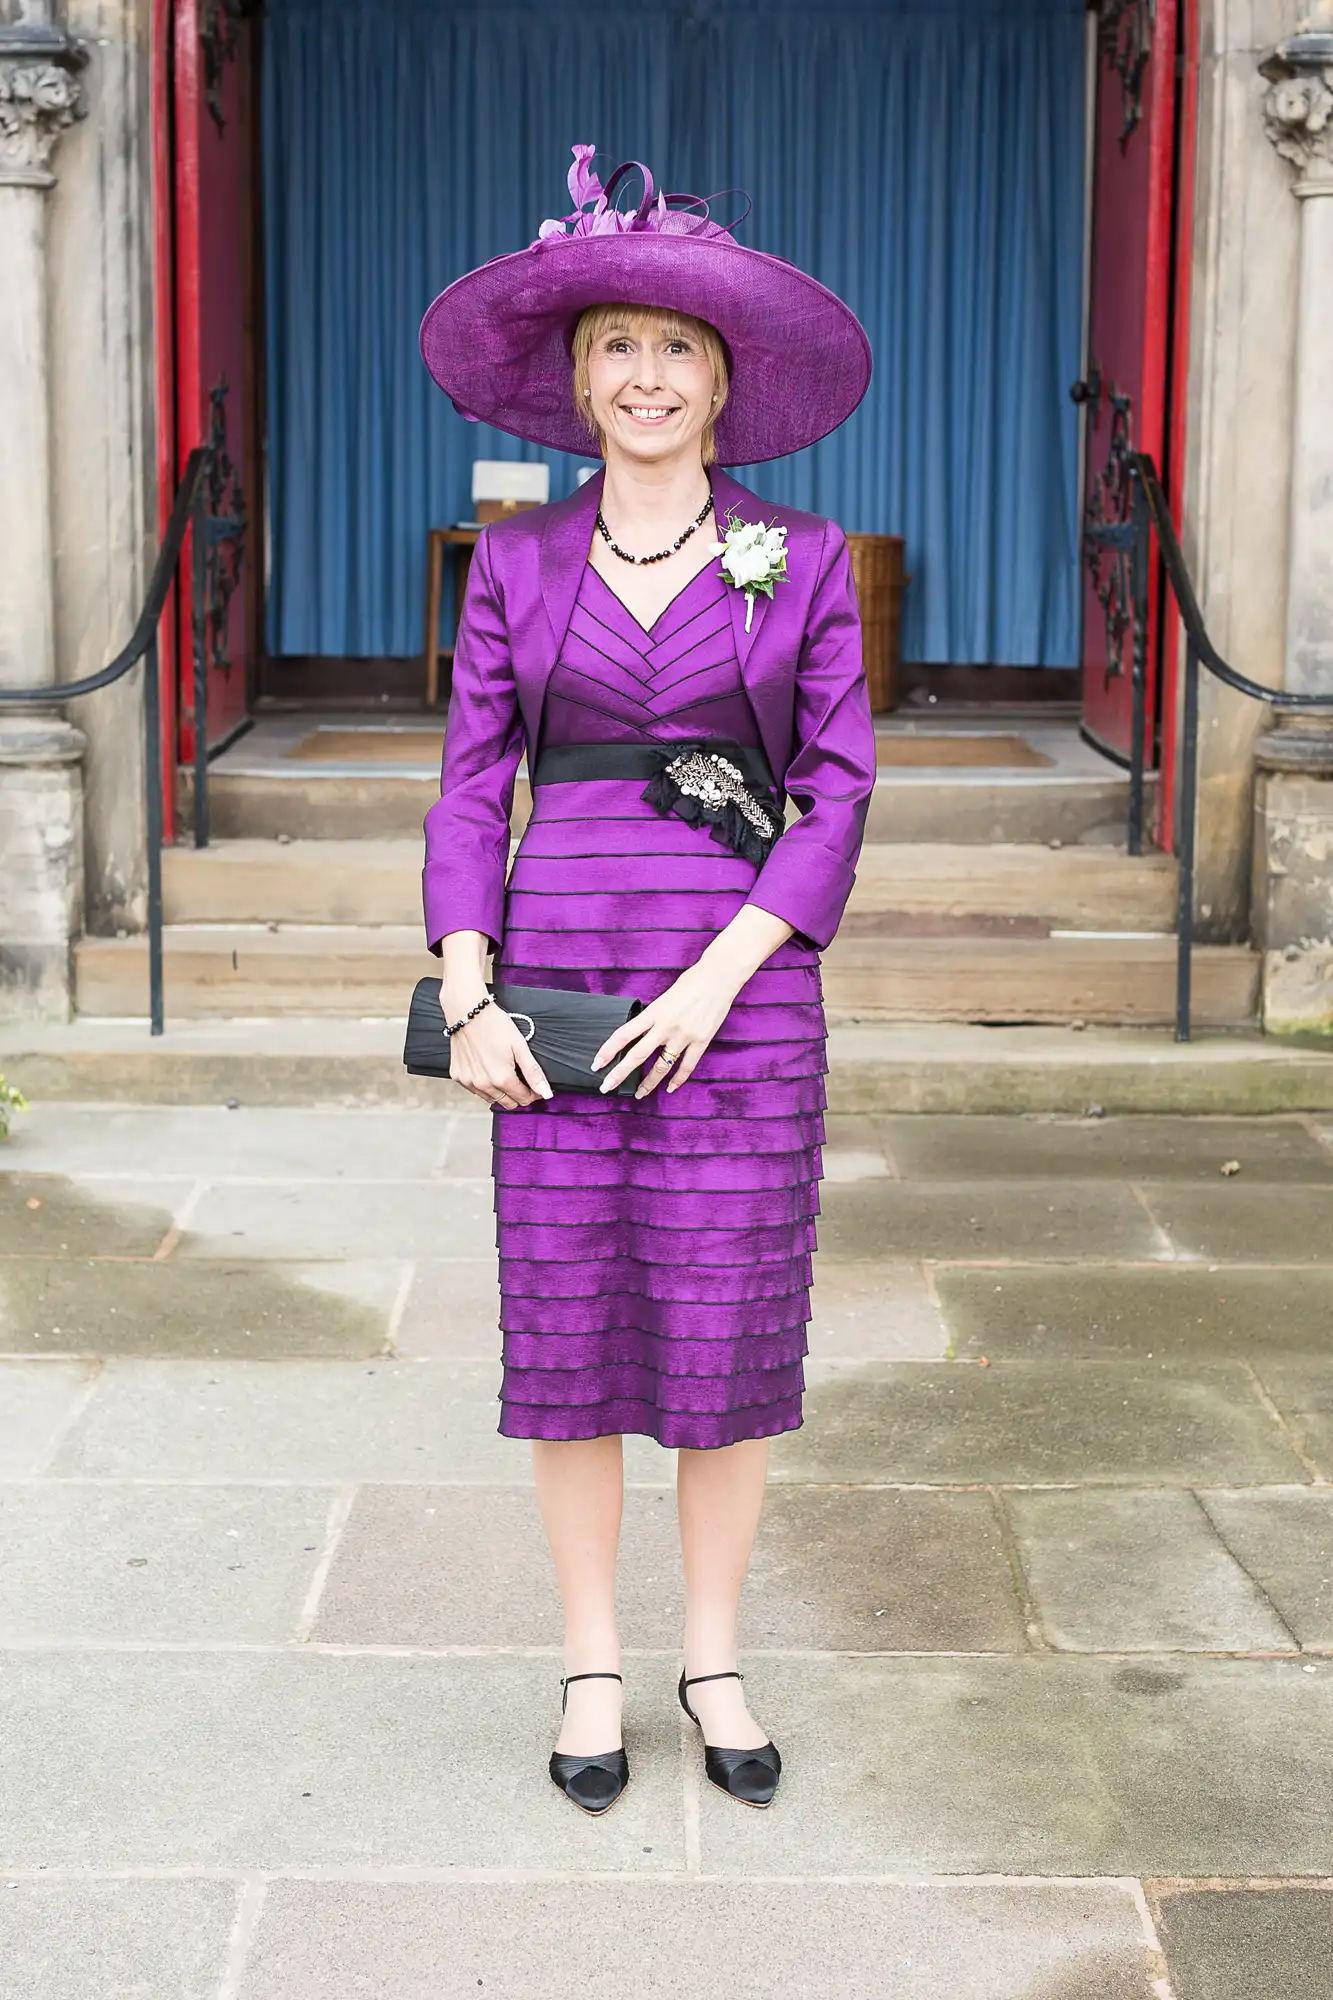 A woman in a purple dress and hat stands smiling in front of a building with red doors.